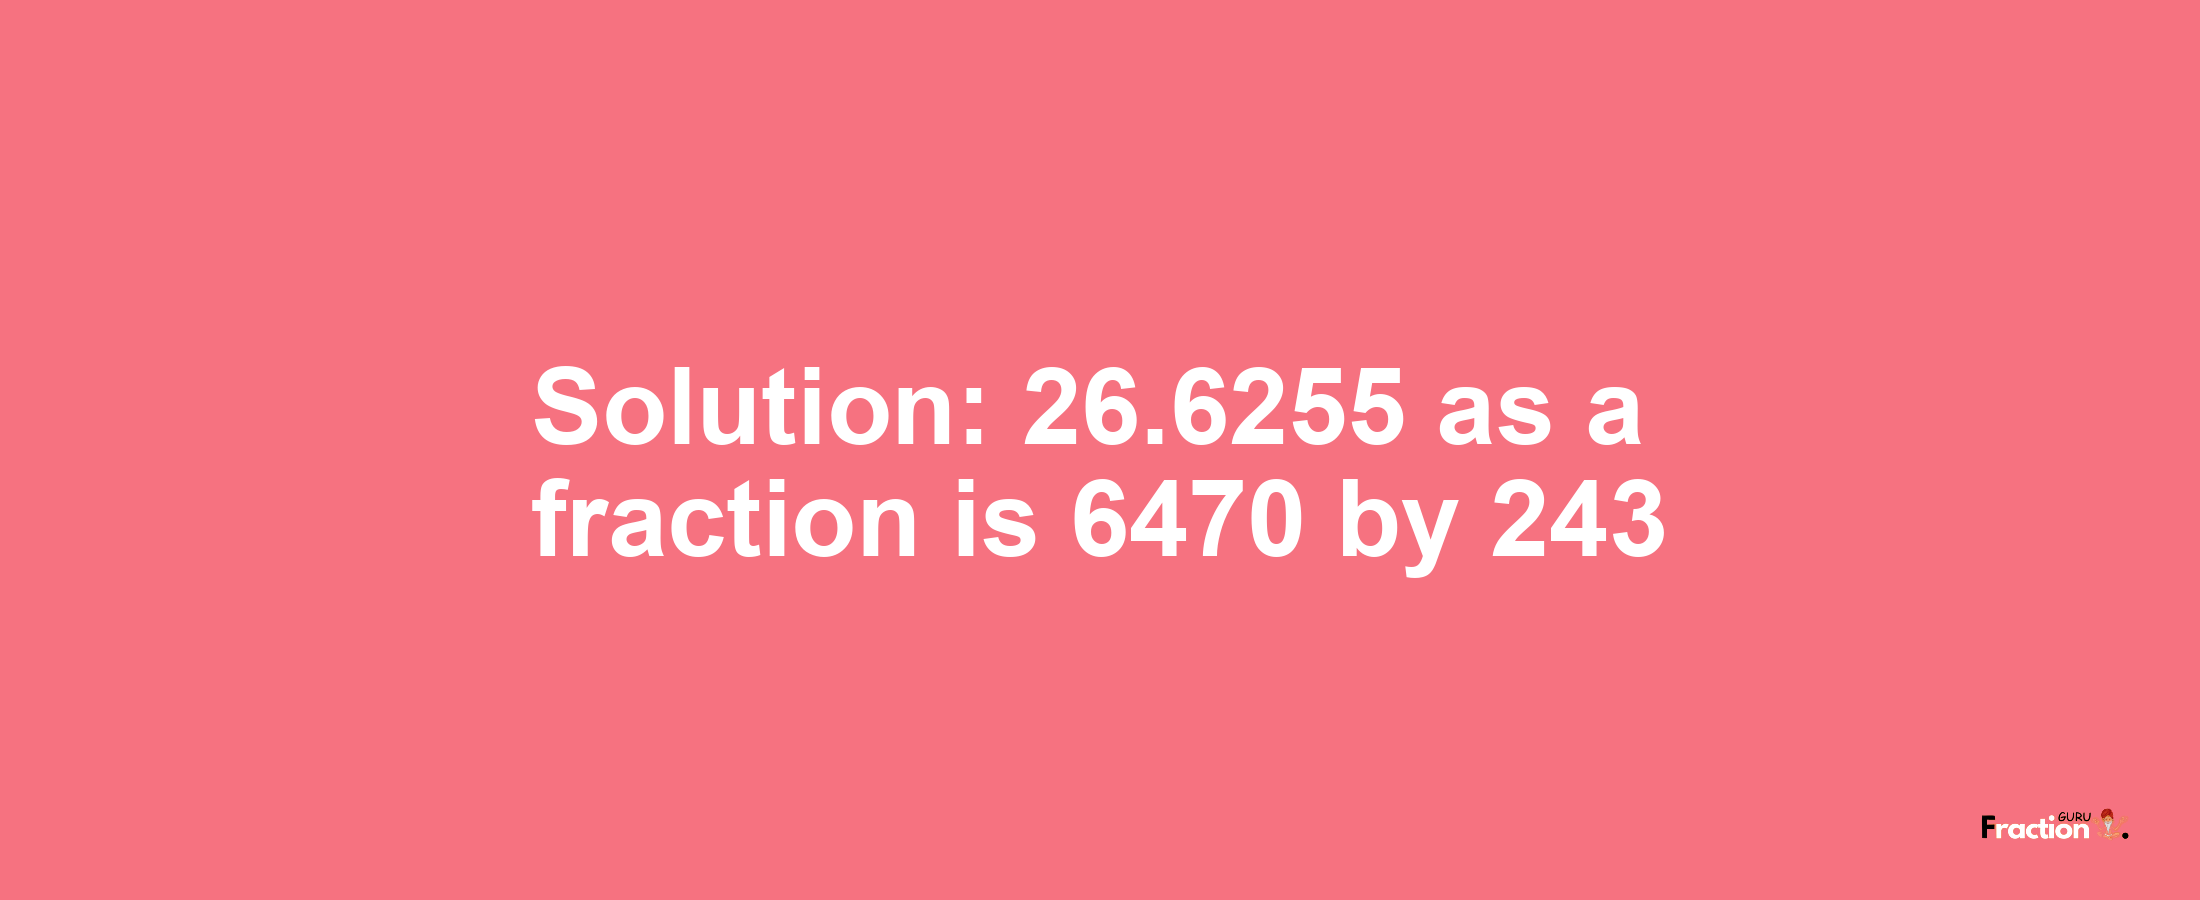 Solution:26.6255 as a fraction is 6470/243